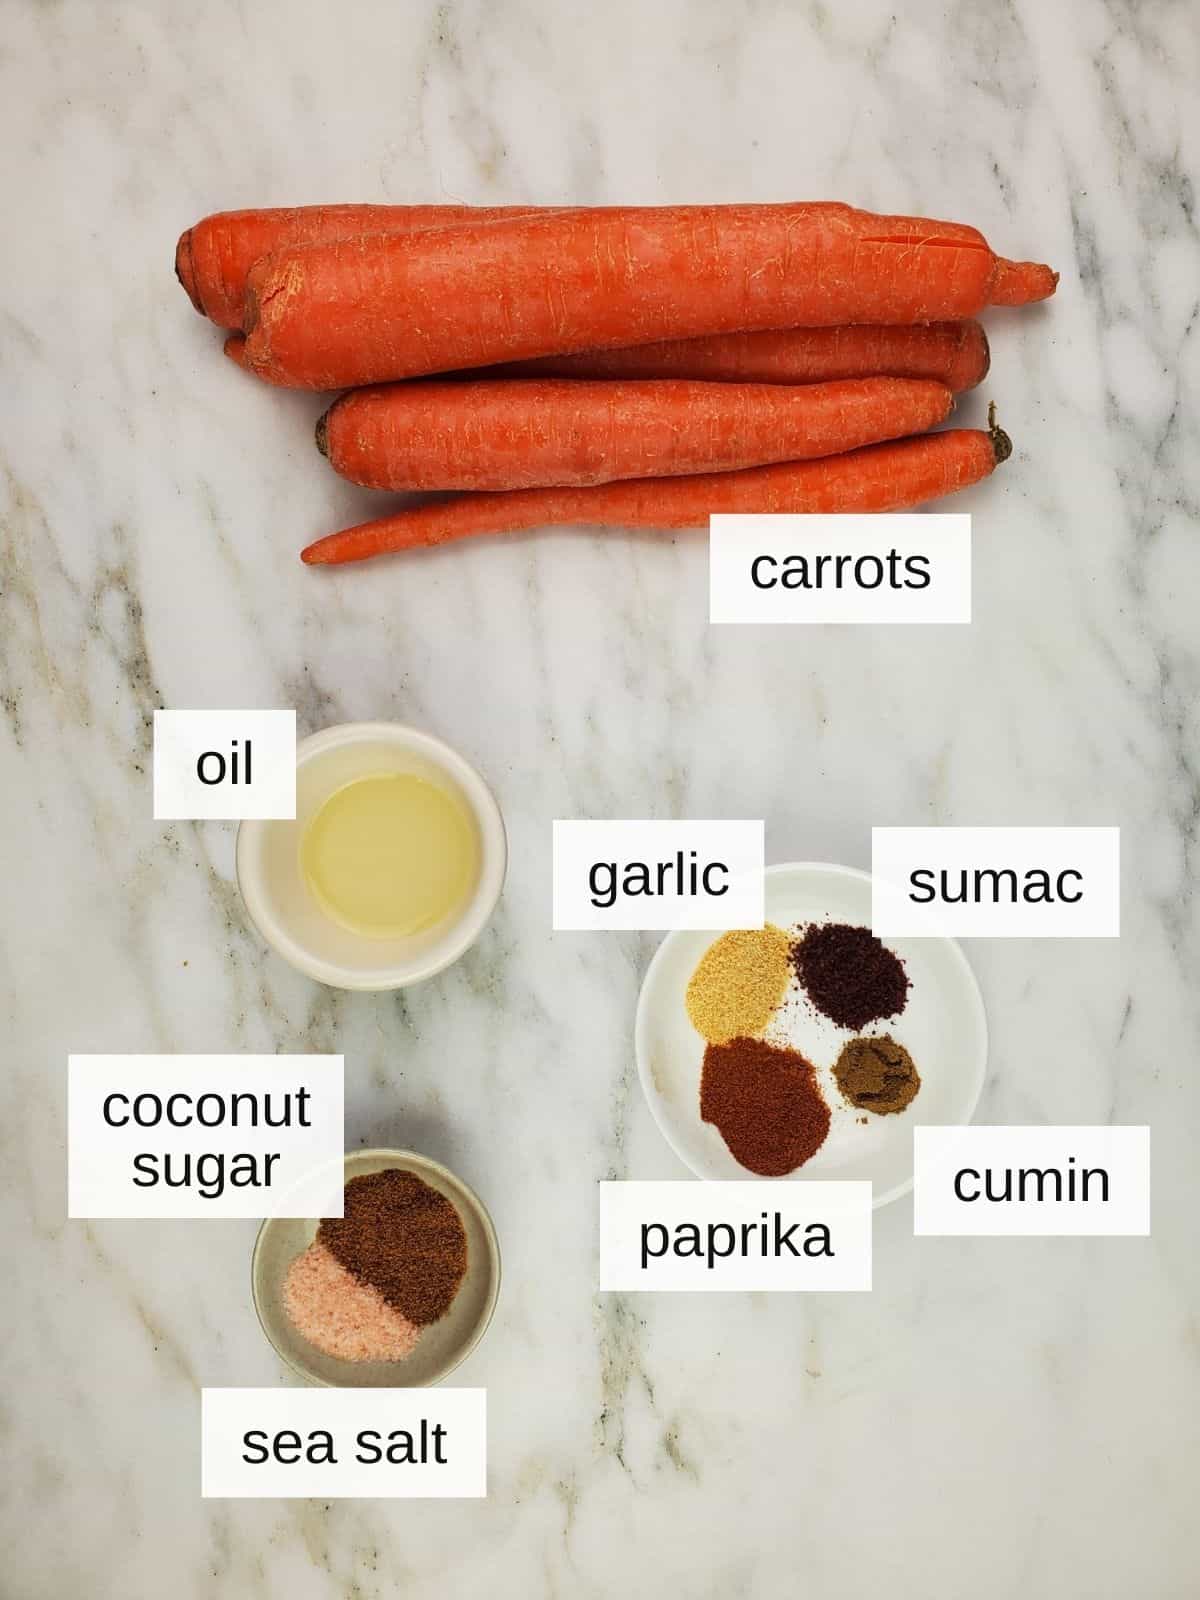 ingredients for making carrots fries in air fryer, including carrots, oil, garlic, sumac, coconut sugar, paprika, cumin, and sea salt.